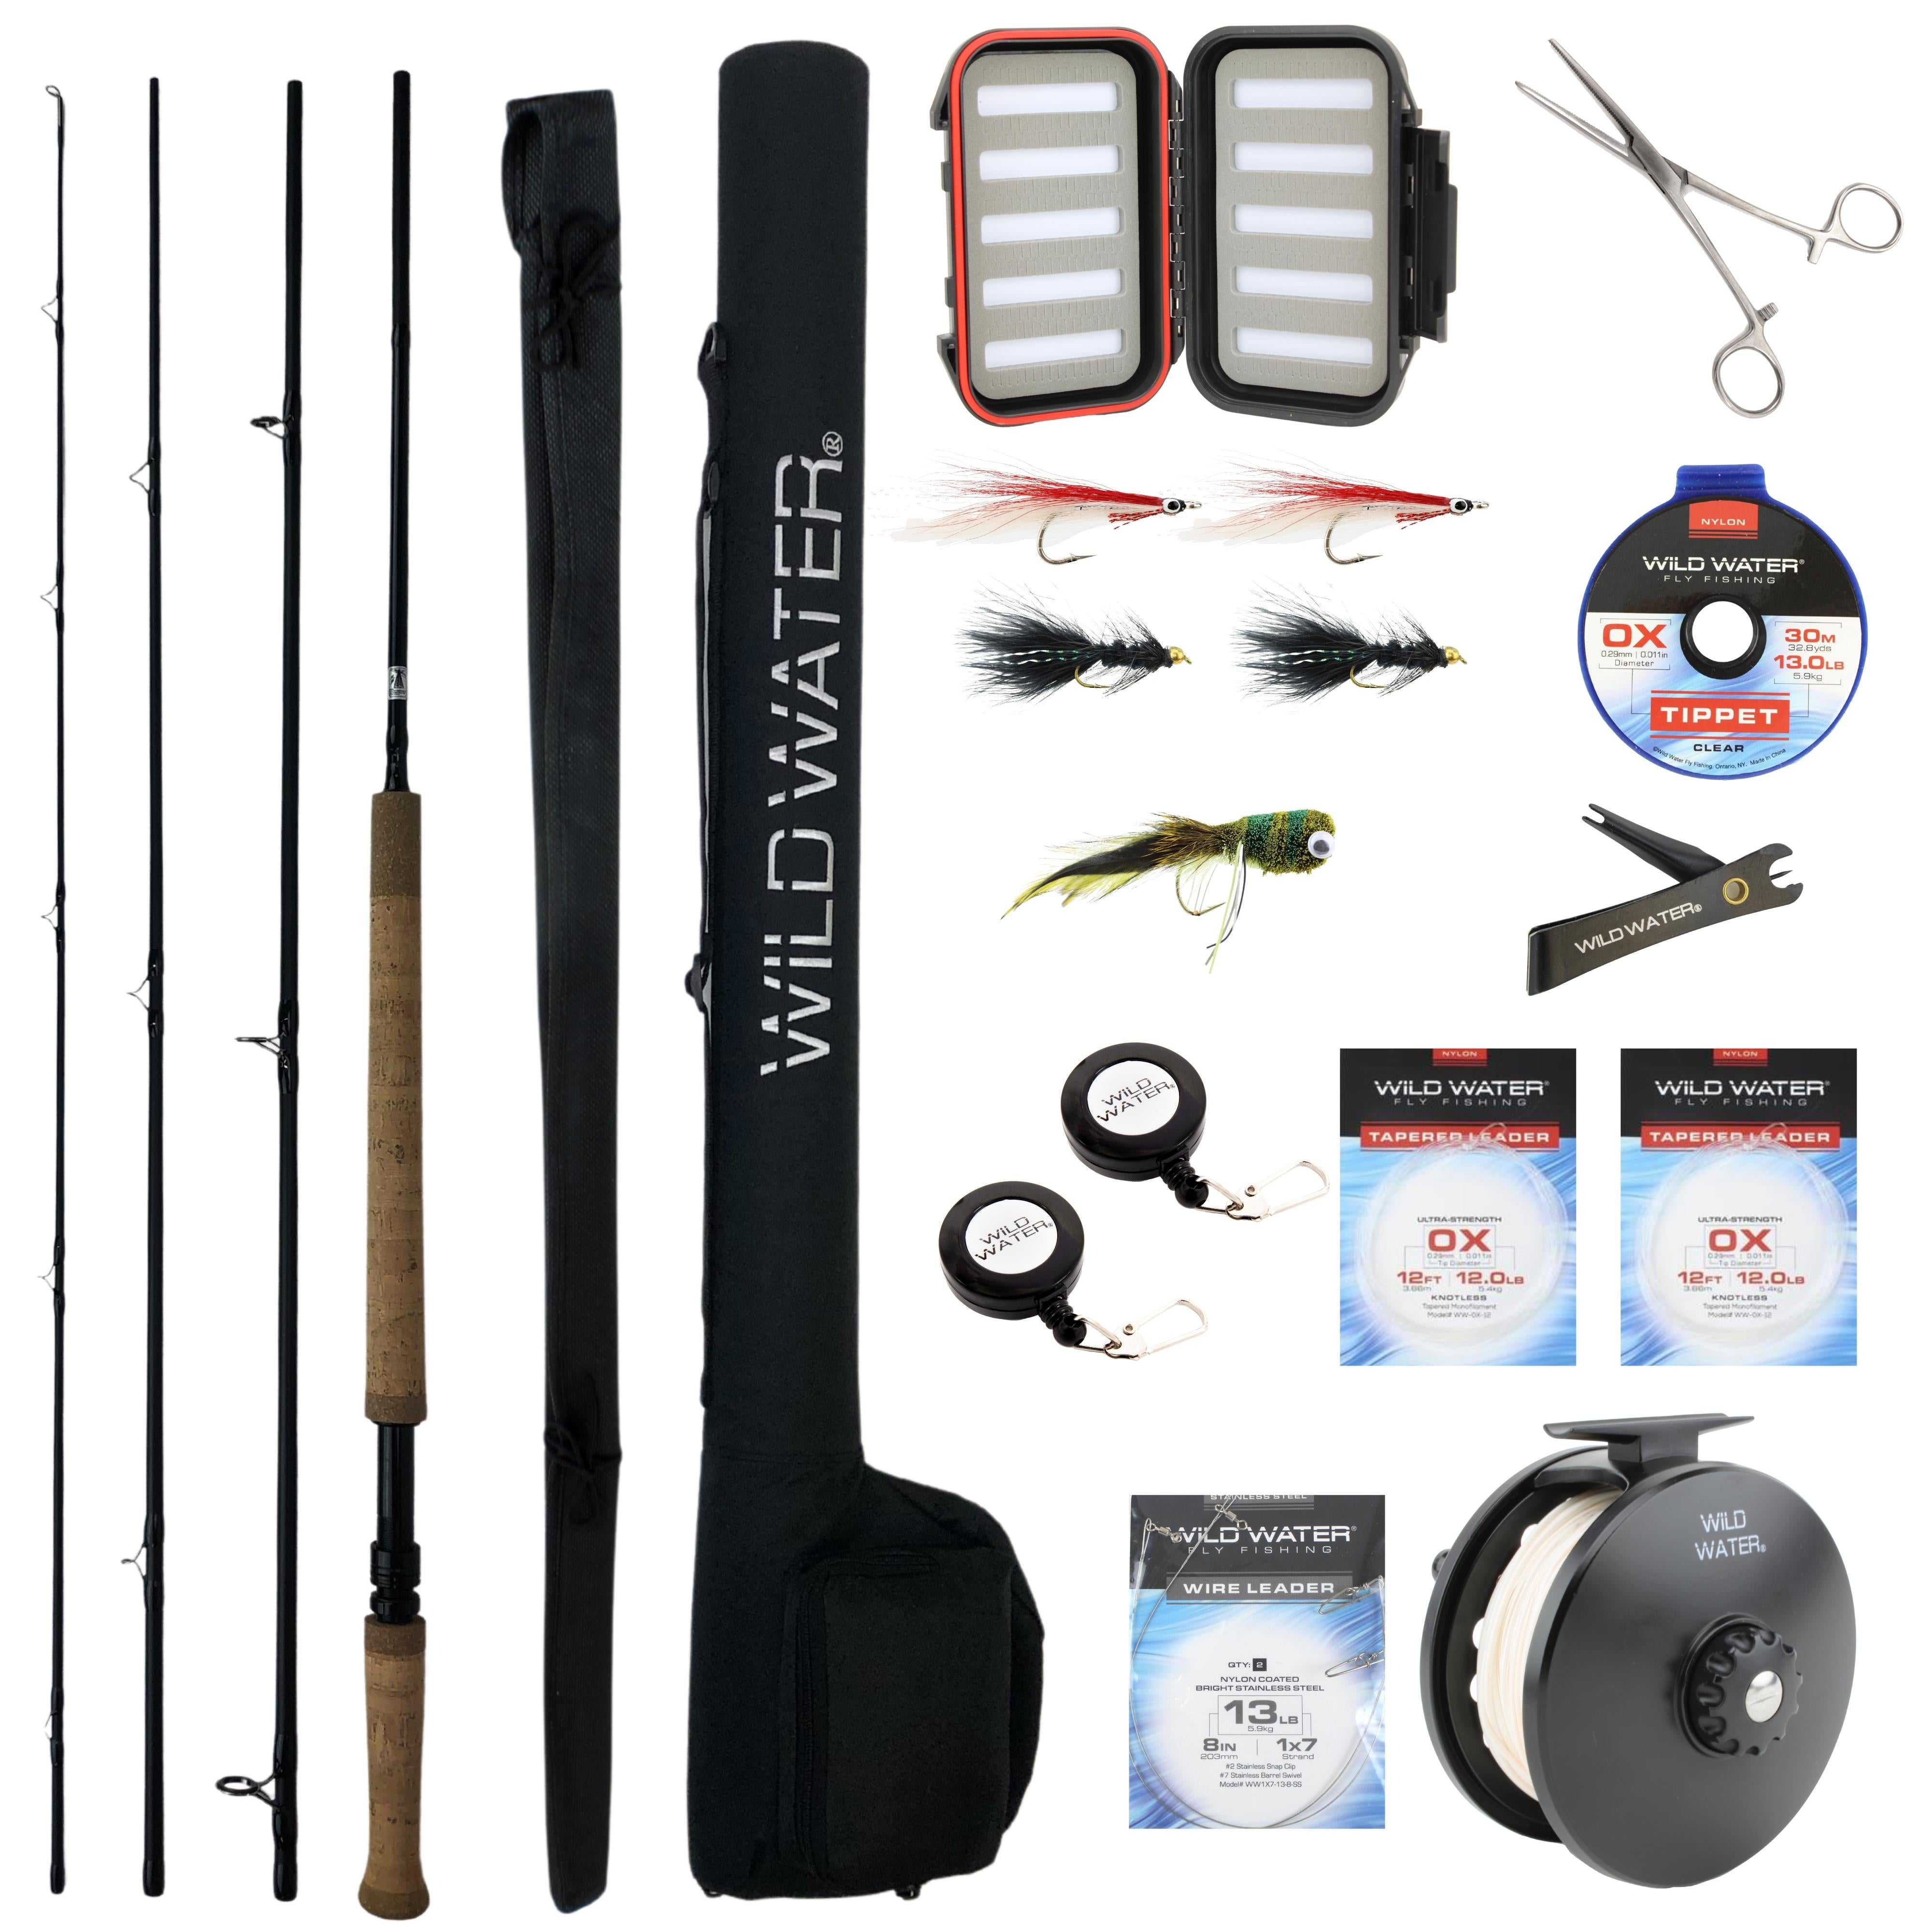 Wild Water Fly Fishing Kit for Bass and Pike, 11 ft 5 wt Switch